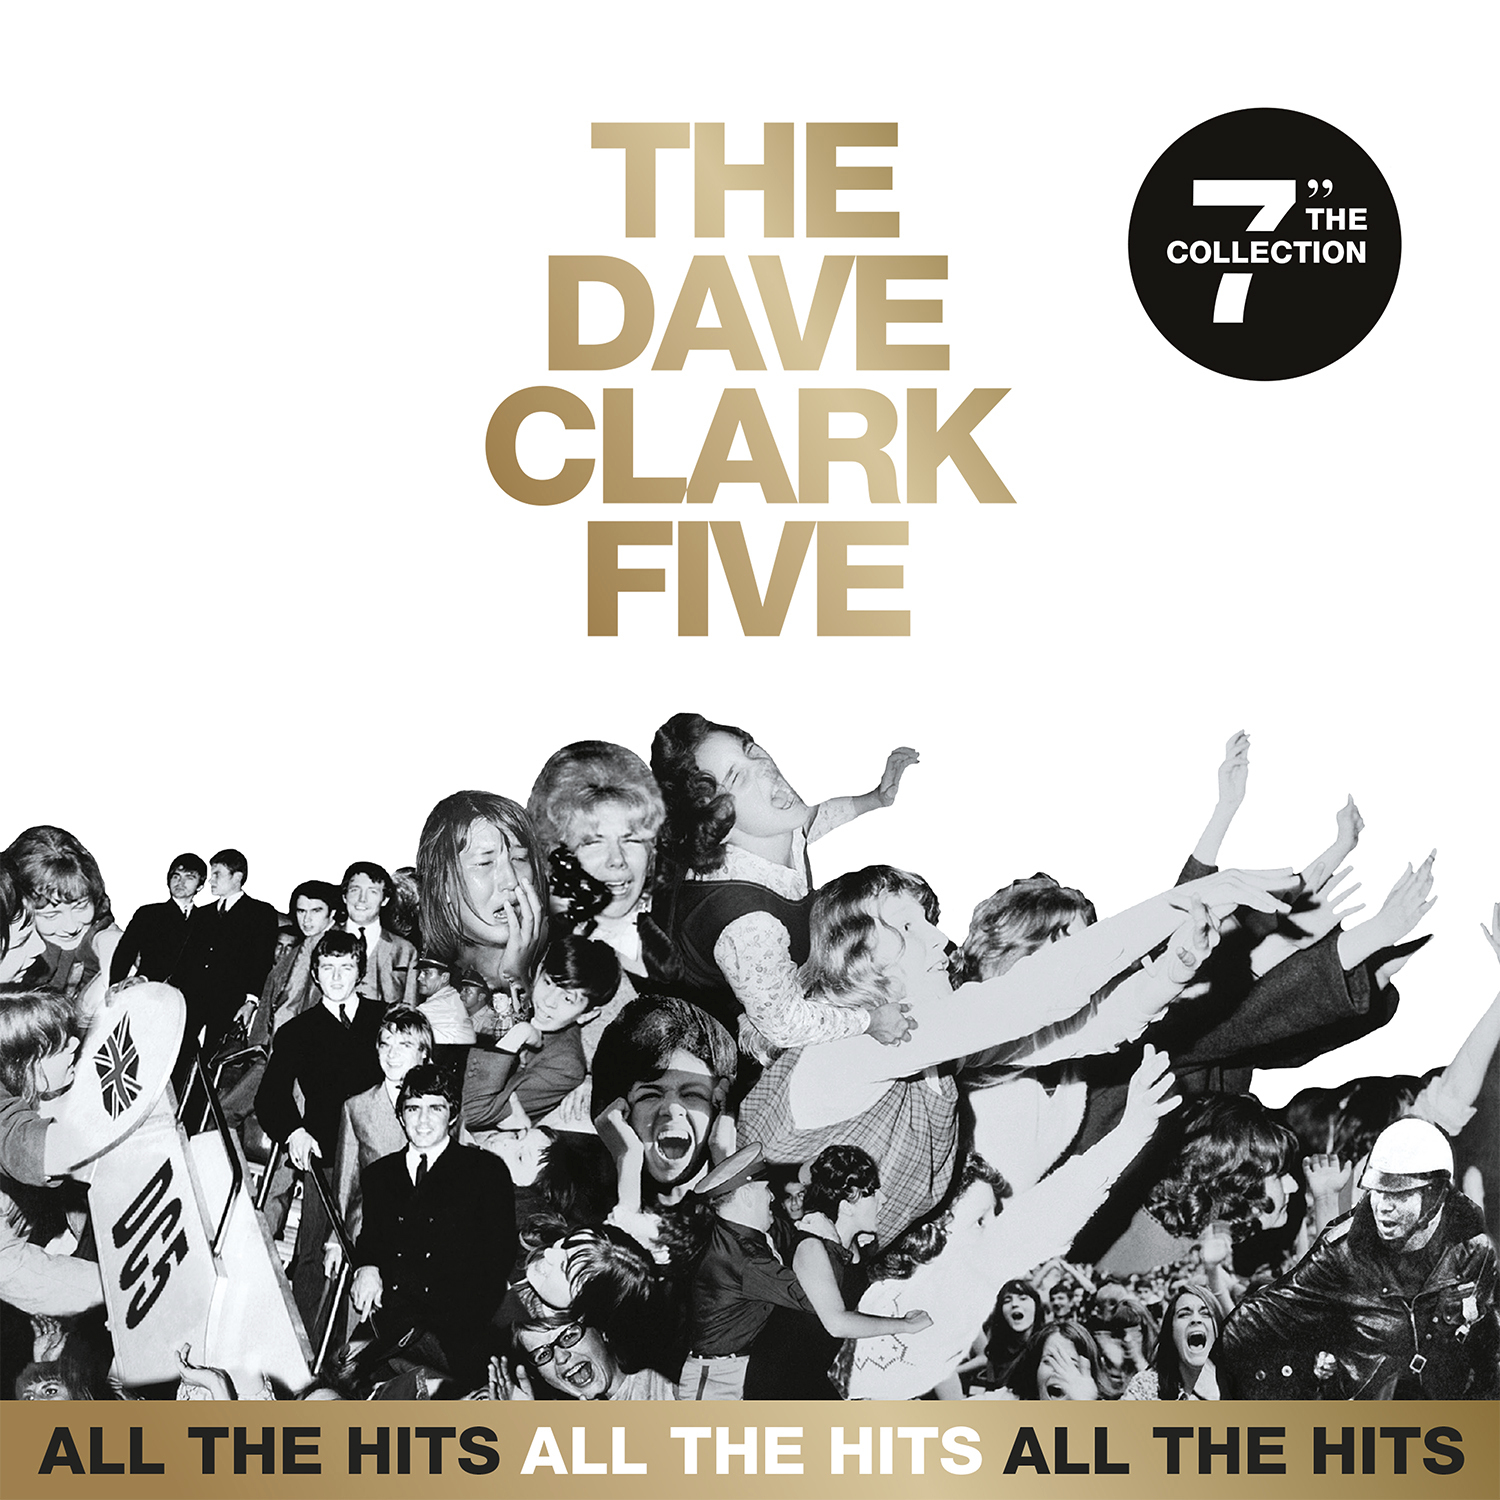 THE DAVE CLARK FIVE Announces ‘ALL THE HITS - THE 7” COLLECTION’